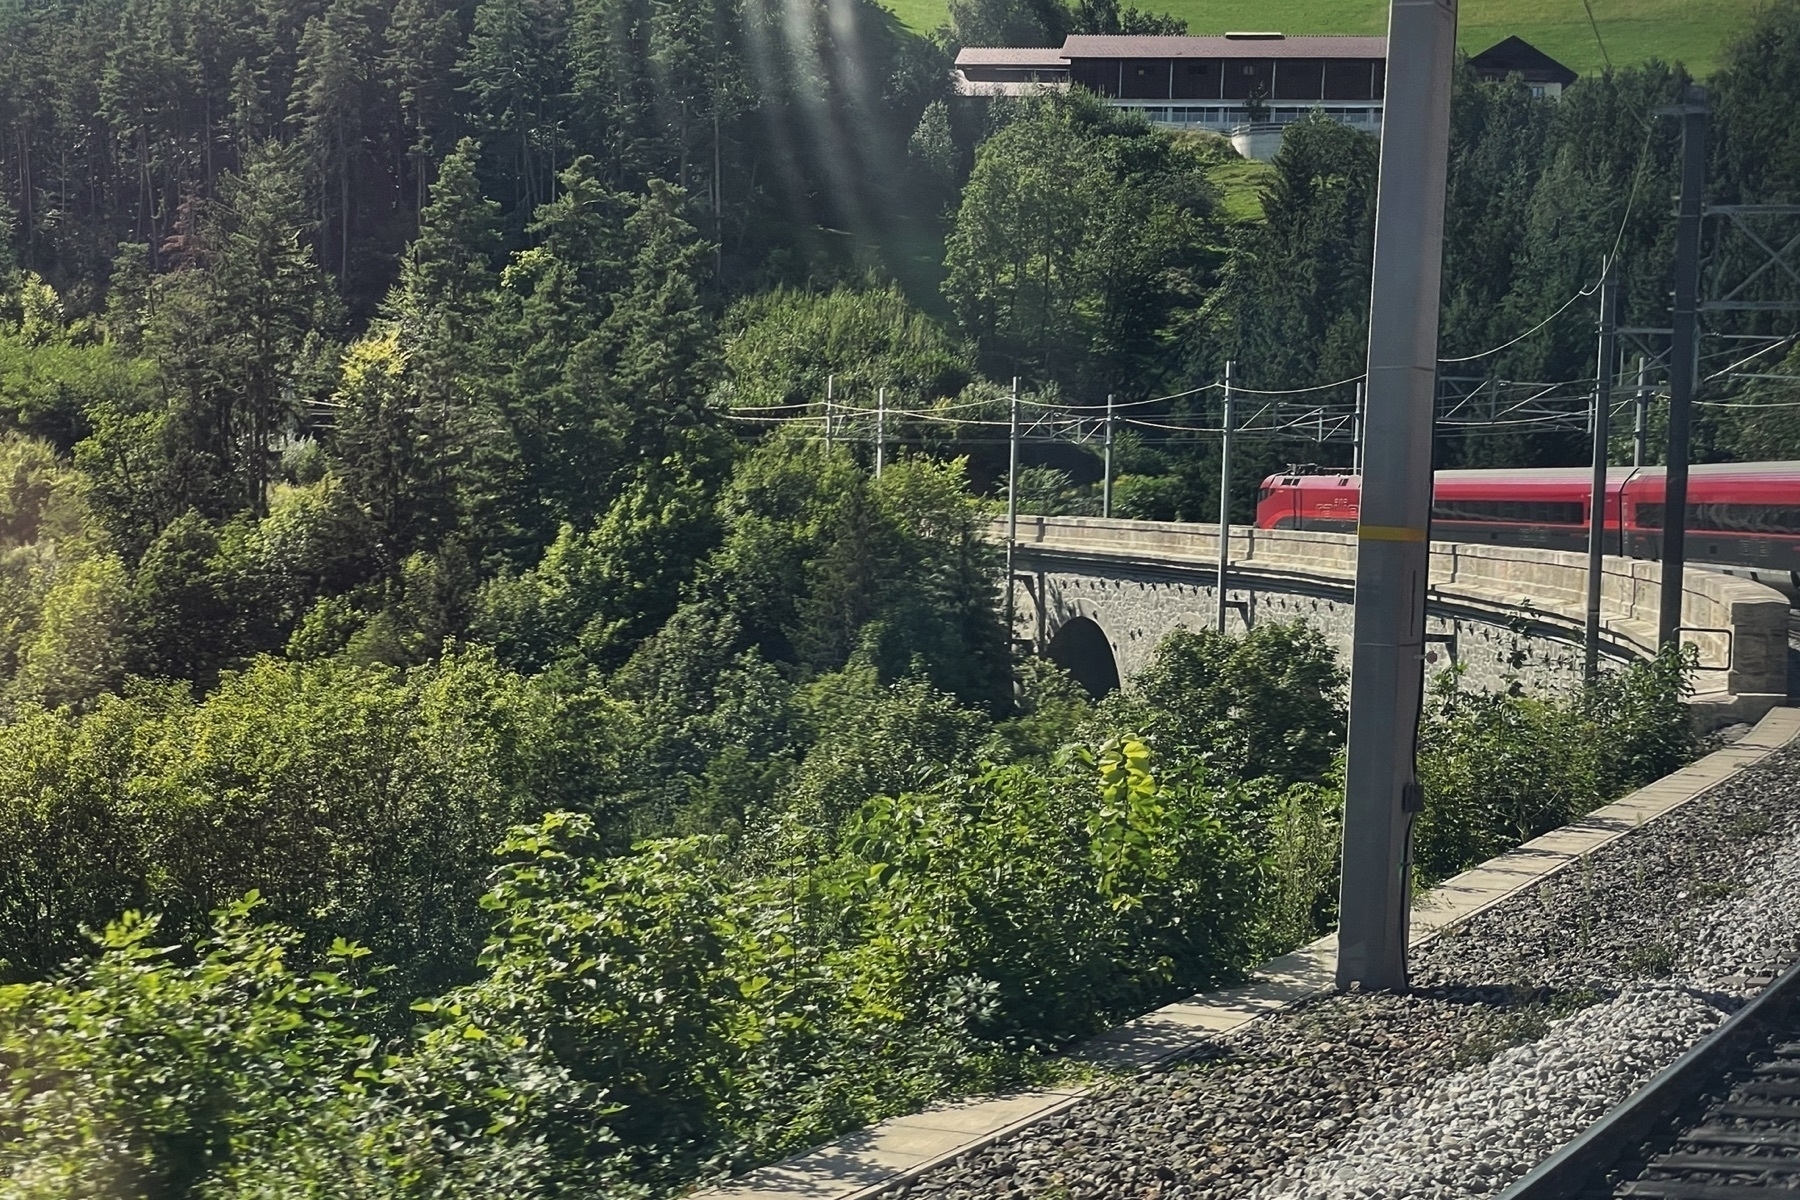 Train traveling through a bend, so you can see the preceding wagons, currently traveling over a stone bridge, lots of green and hills in the background